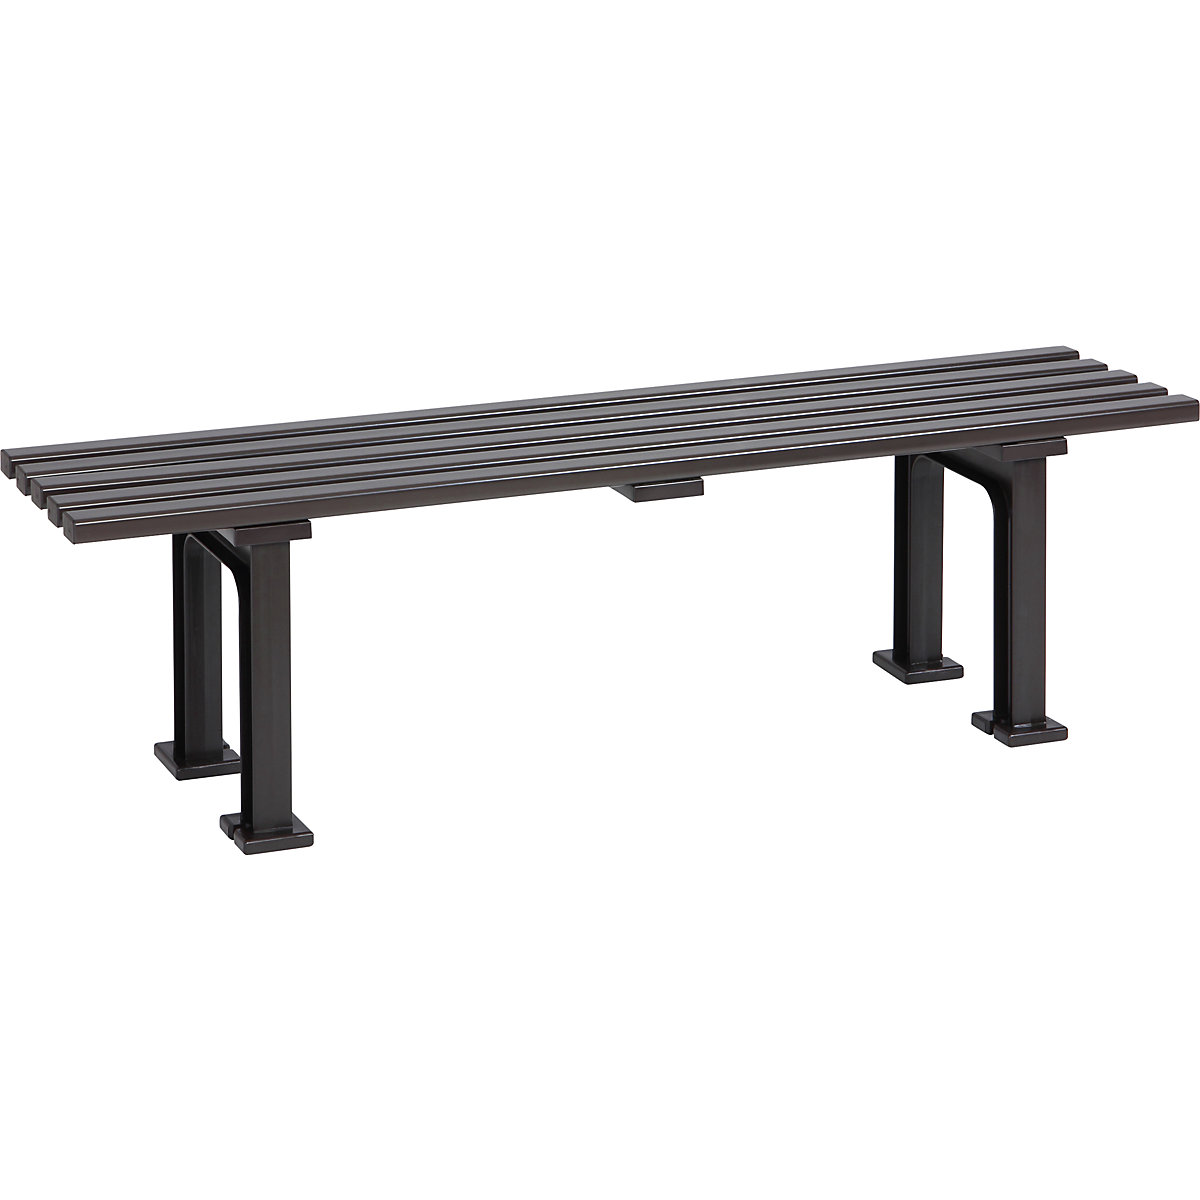 Seating bench without backrest, with 5 slats, length 1500 mm, brown-12